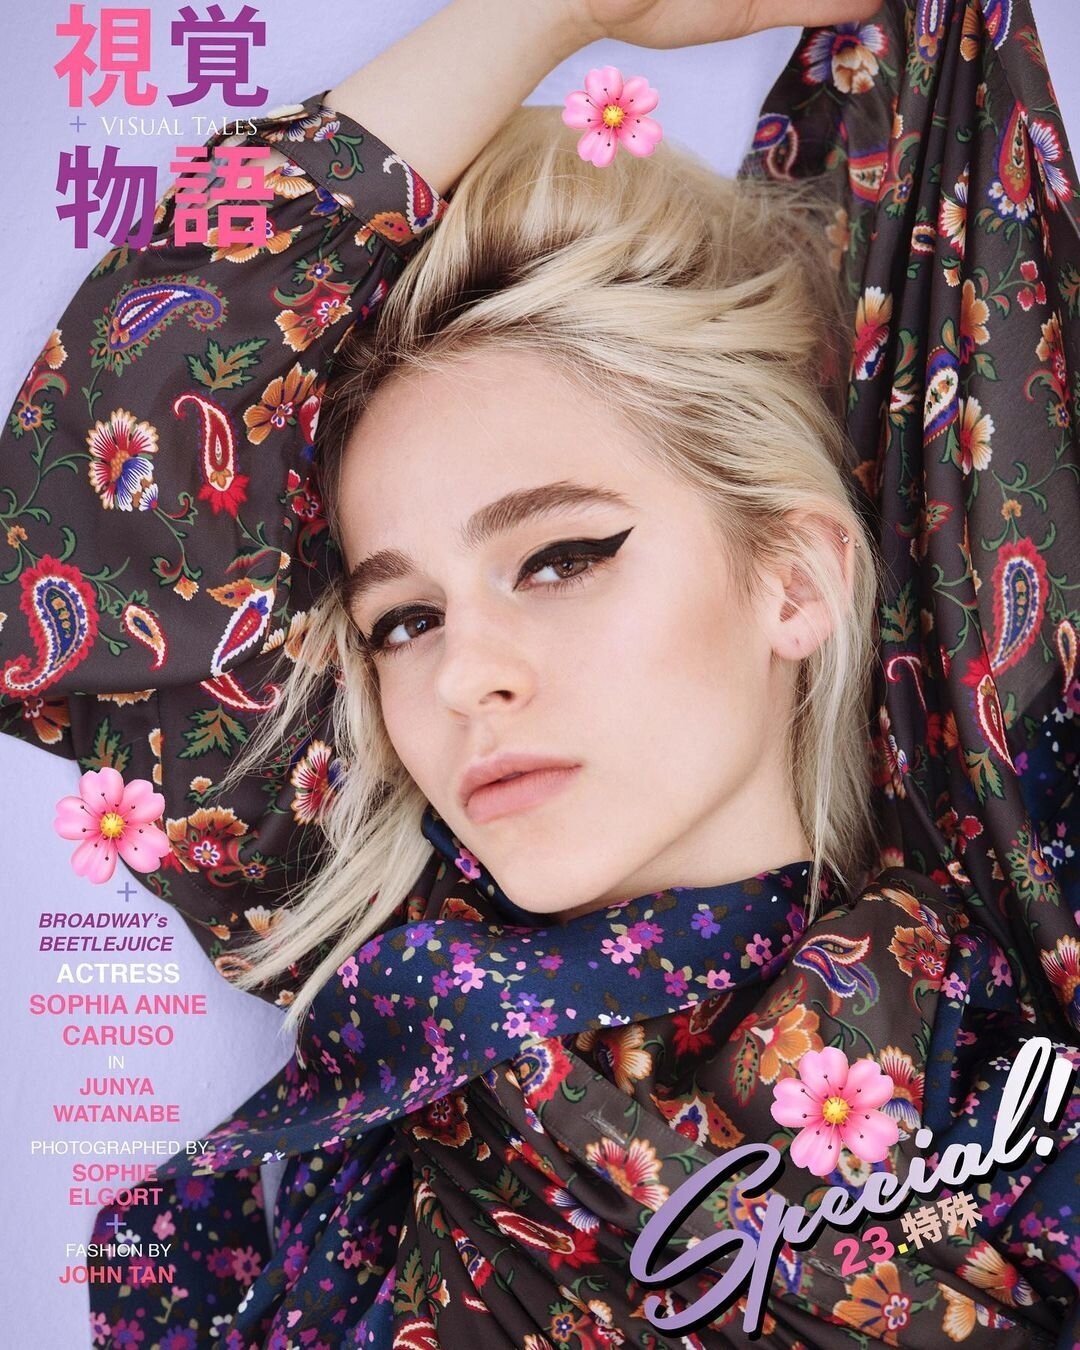 @sophiaannecaruso for the cover of @visualtales 💮⁠
⁠
Photography: @sophieelgort⁠
Stylist: @johntanstyling⁠
Hair: @miasantiagohair⁠
Makeup: @ivelisserosadoartistry⁠
.⁠⁠
.⁠⁠
.⁠⁠
#shotatdaylight #daylightstudio #fashion #fashiongram #fashionphotography